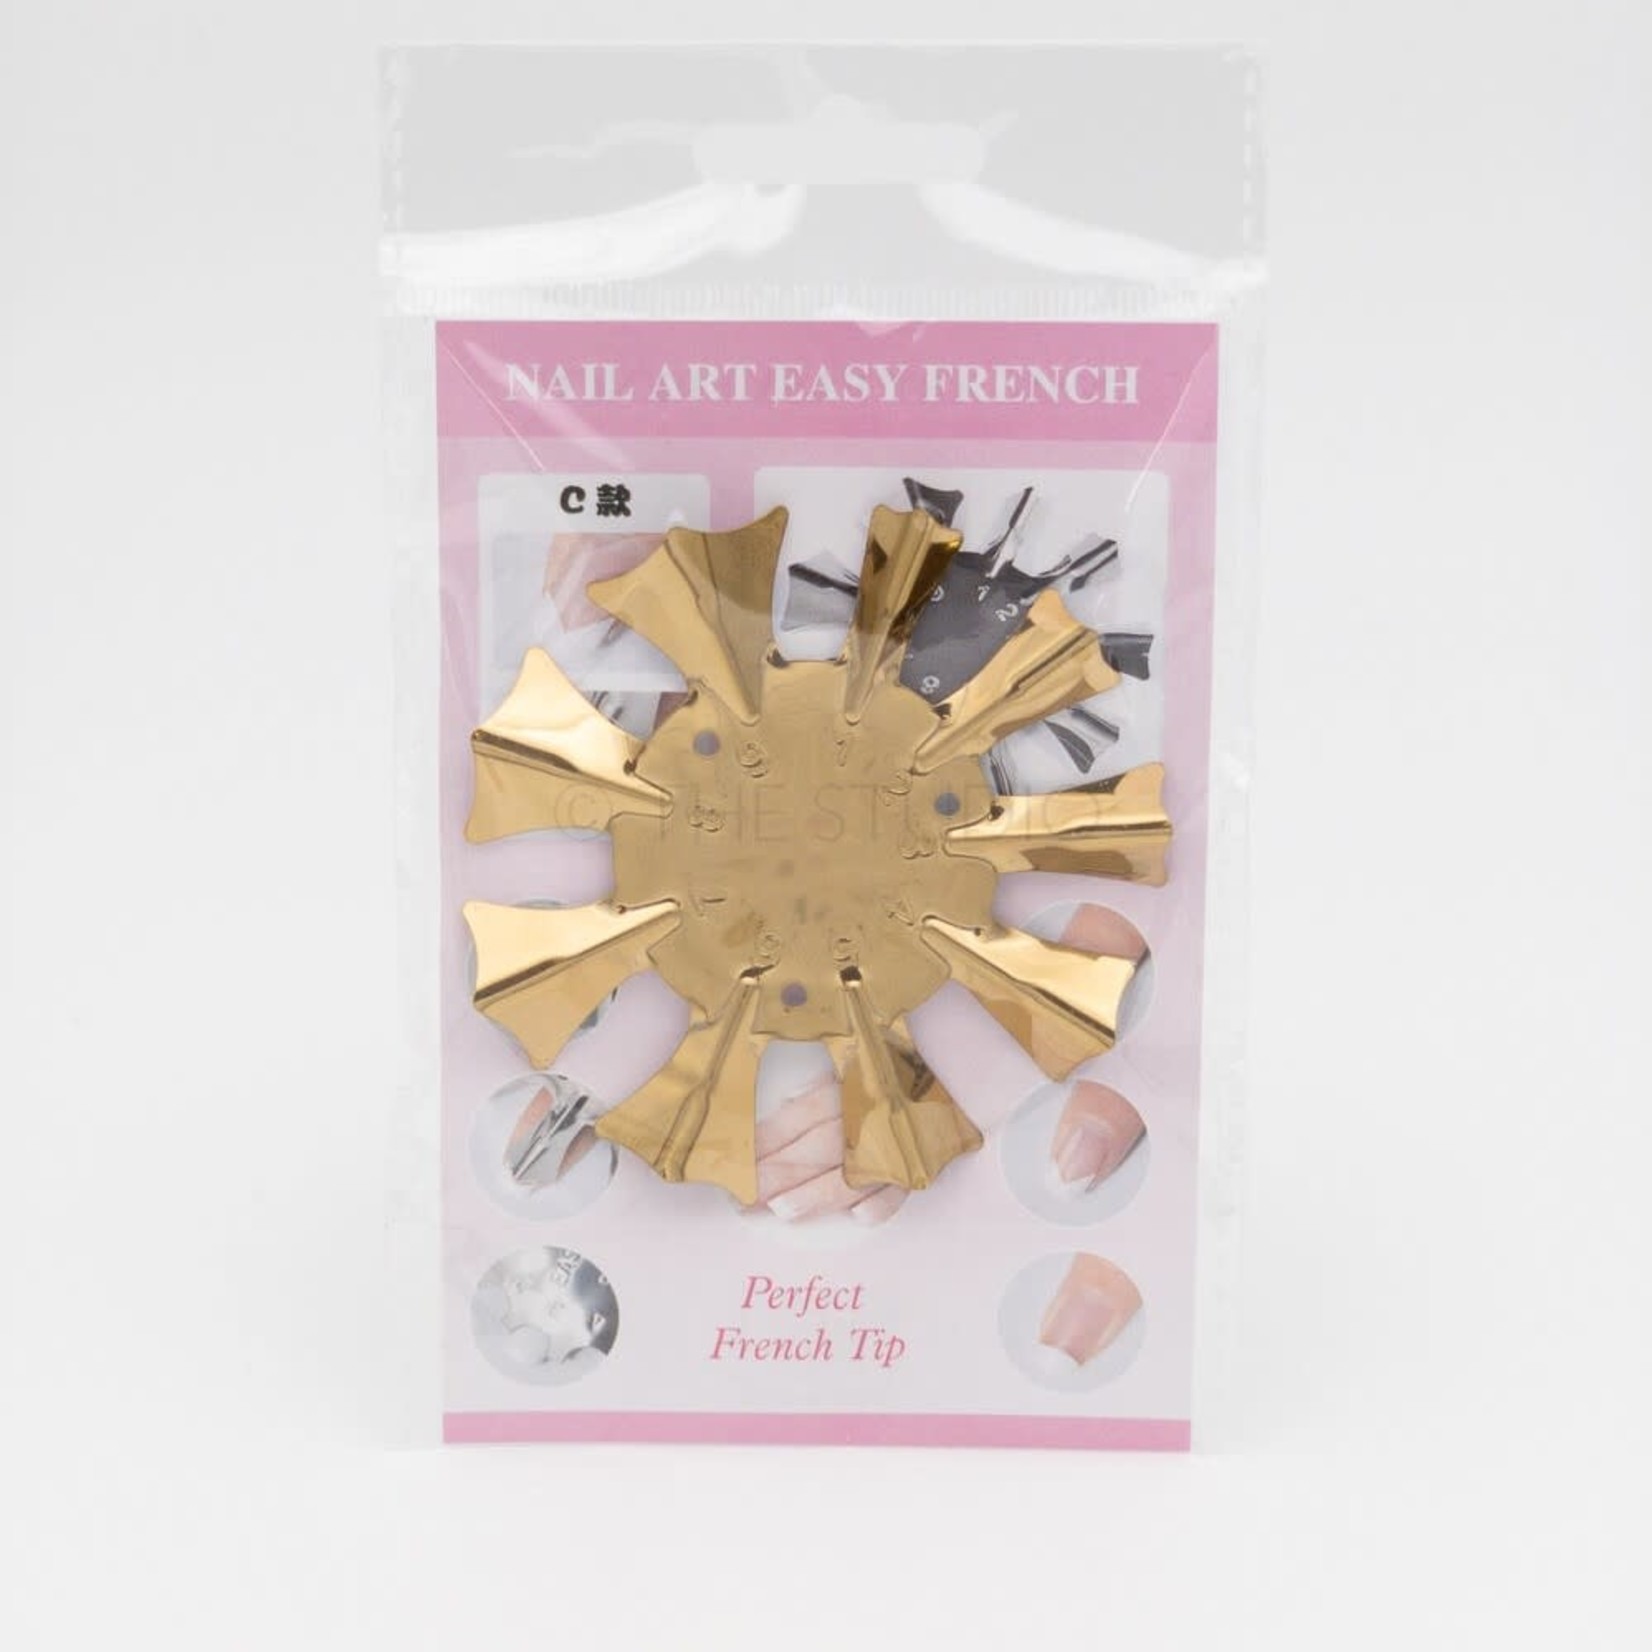 The Studio Nail Art Easy French Cutter - C